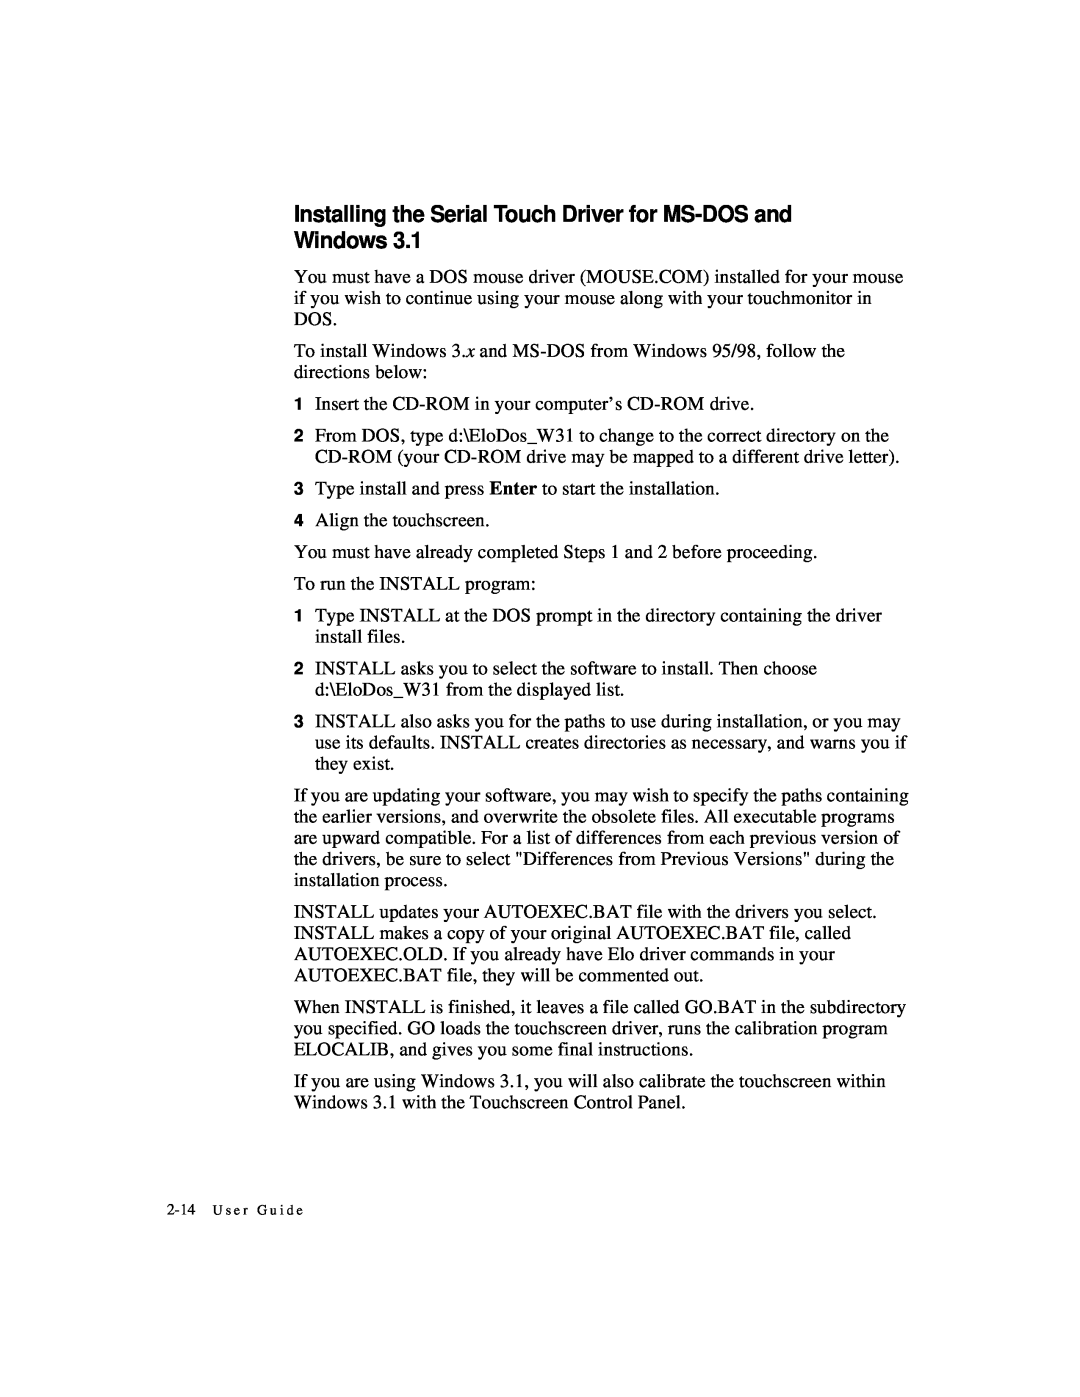 Elo TouchSystems 1524L manual Installing the Serial Touch Driver for MS-DOS and Windows, U s e r G u i d e 